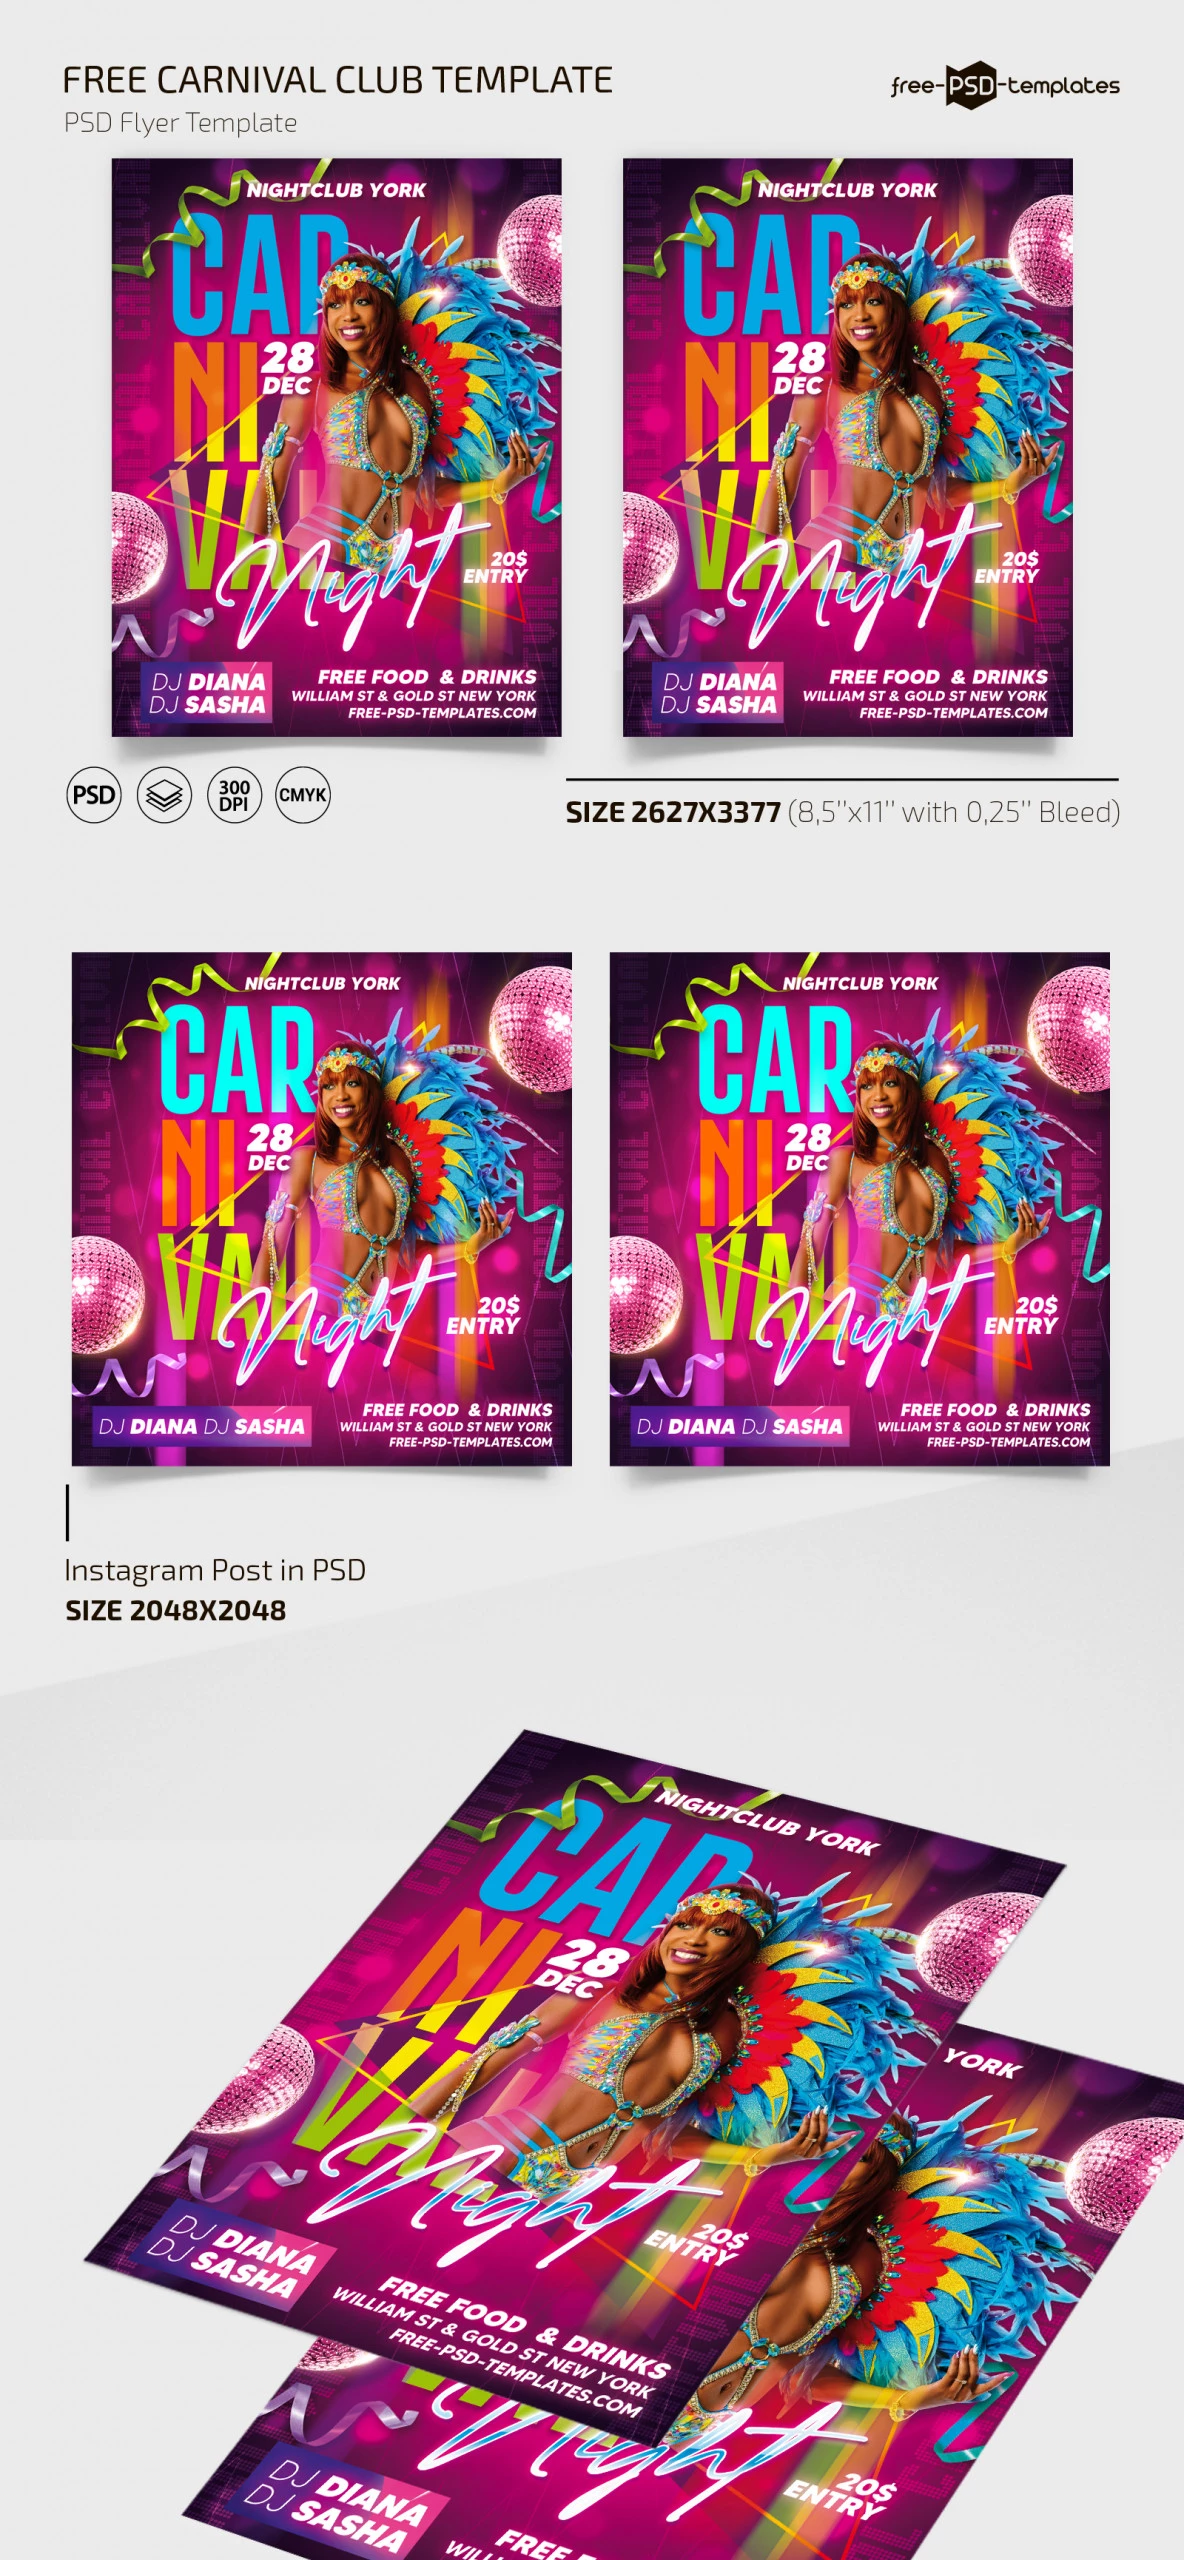 Free Carnival Party Template + Instagram Post (PSD)